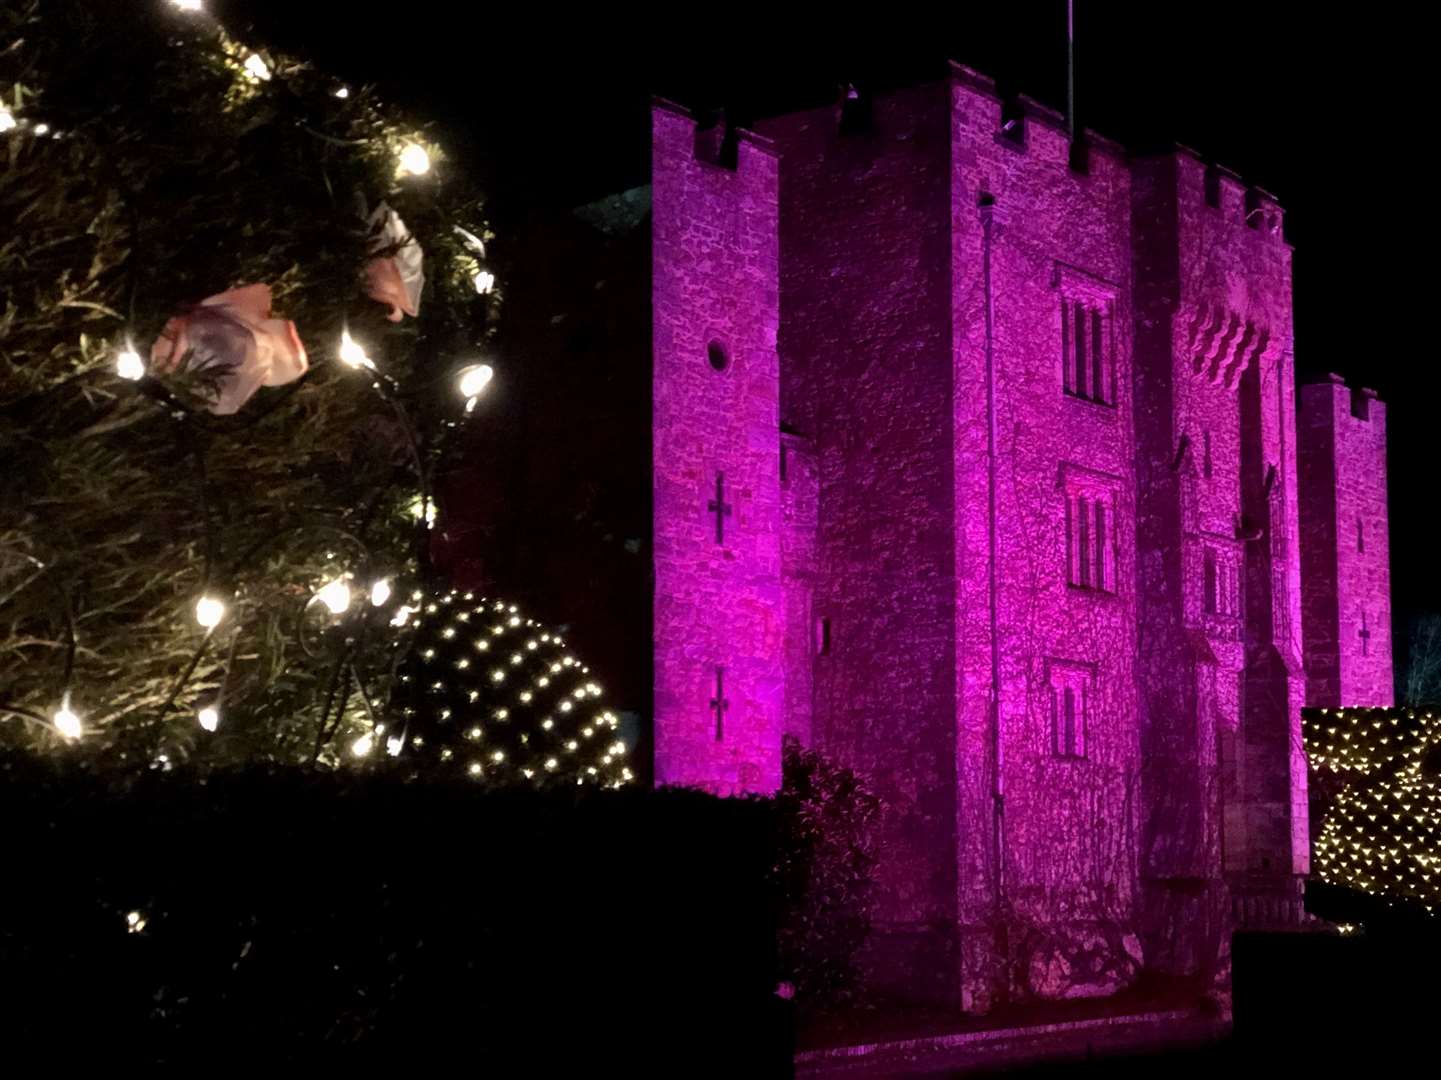 Much of Hever Castle's festive offering is outside